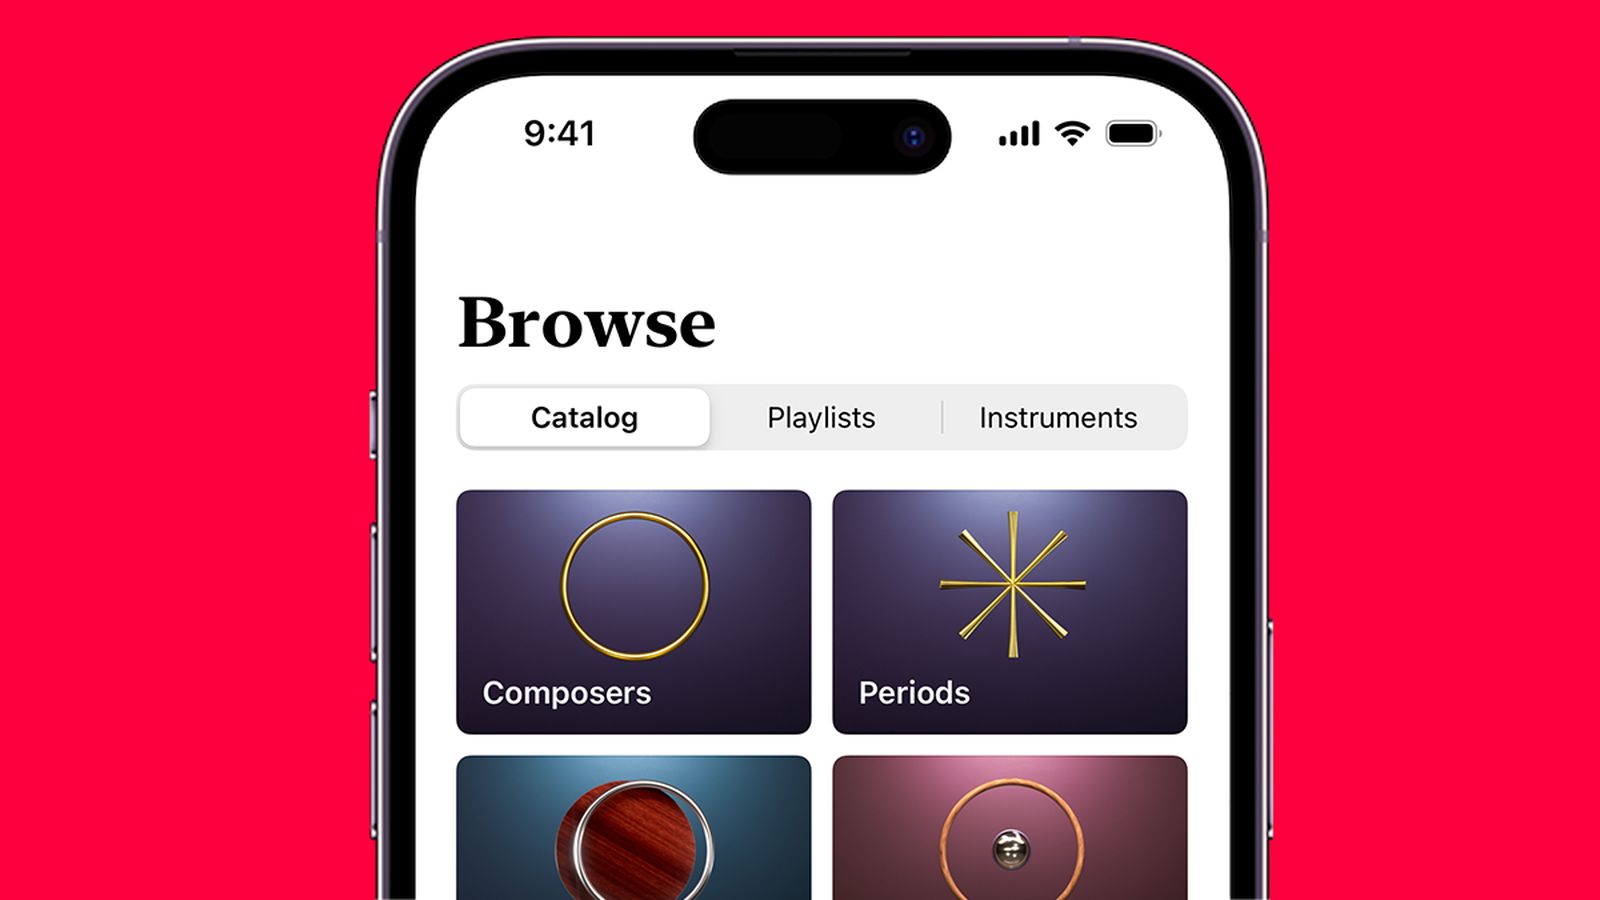 Apple Explains Why It Launched an iPhone App Dedicated to Classical Music